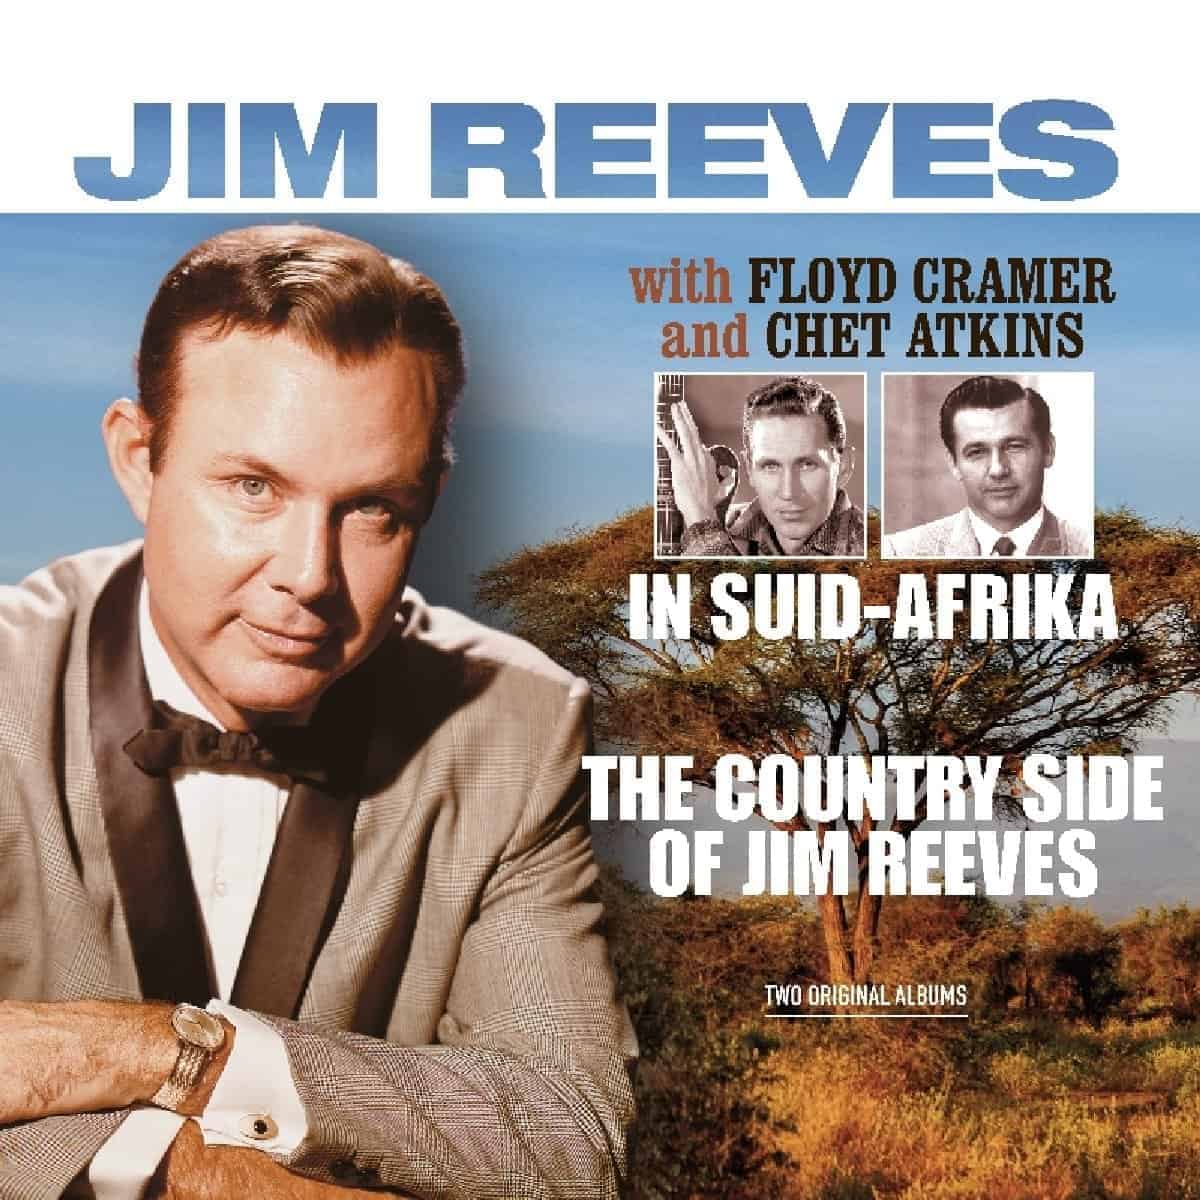 JIM REEVES WITH FLOYD BAKER AND CHET ATKINS - IN SUID-AFRIKA/THE COUNTRY SIDE OF JIM REEVES